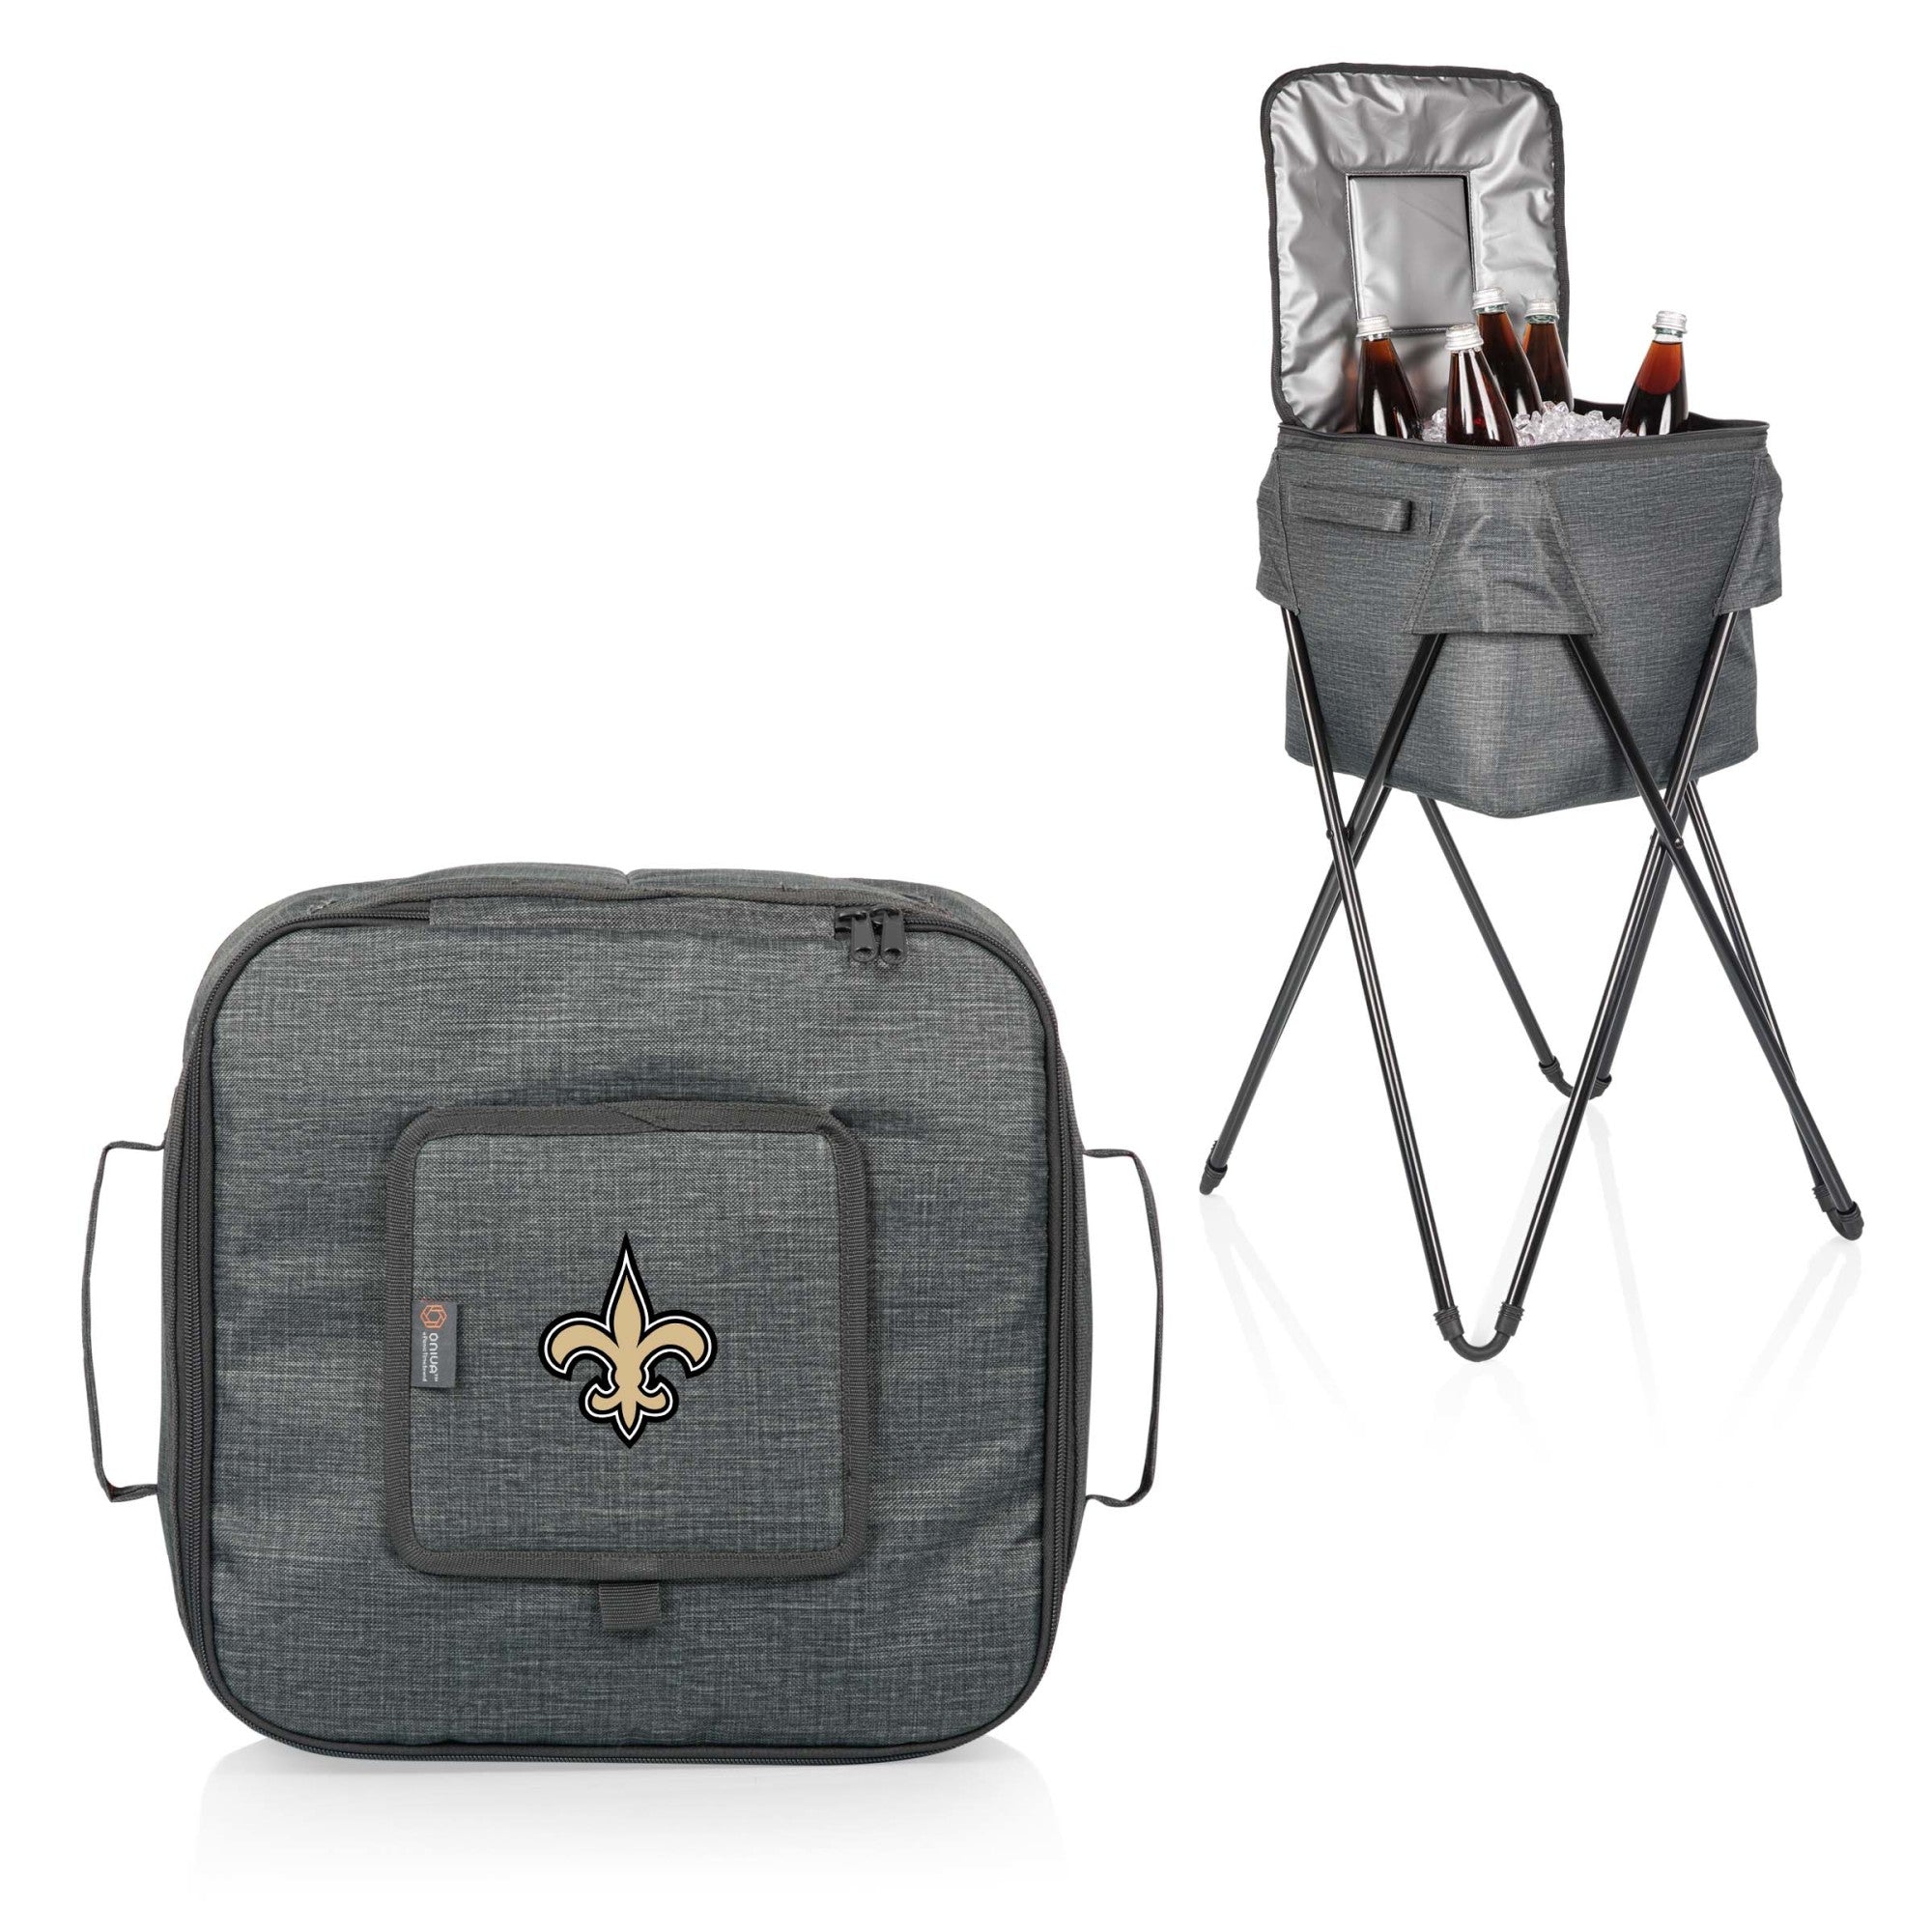 New Orleans Saints - Camping Party Cooler with Stand, (Heathered Gray)